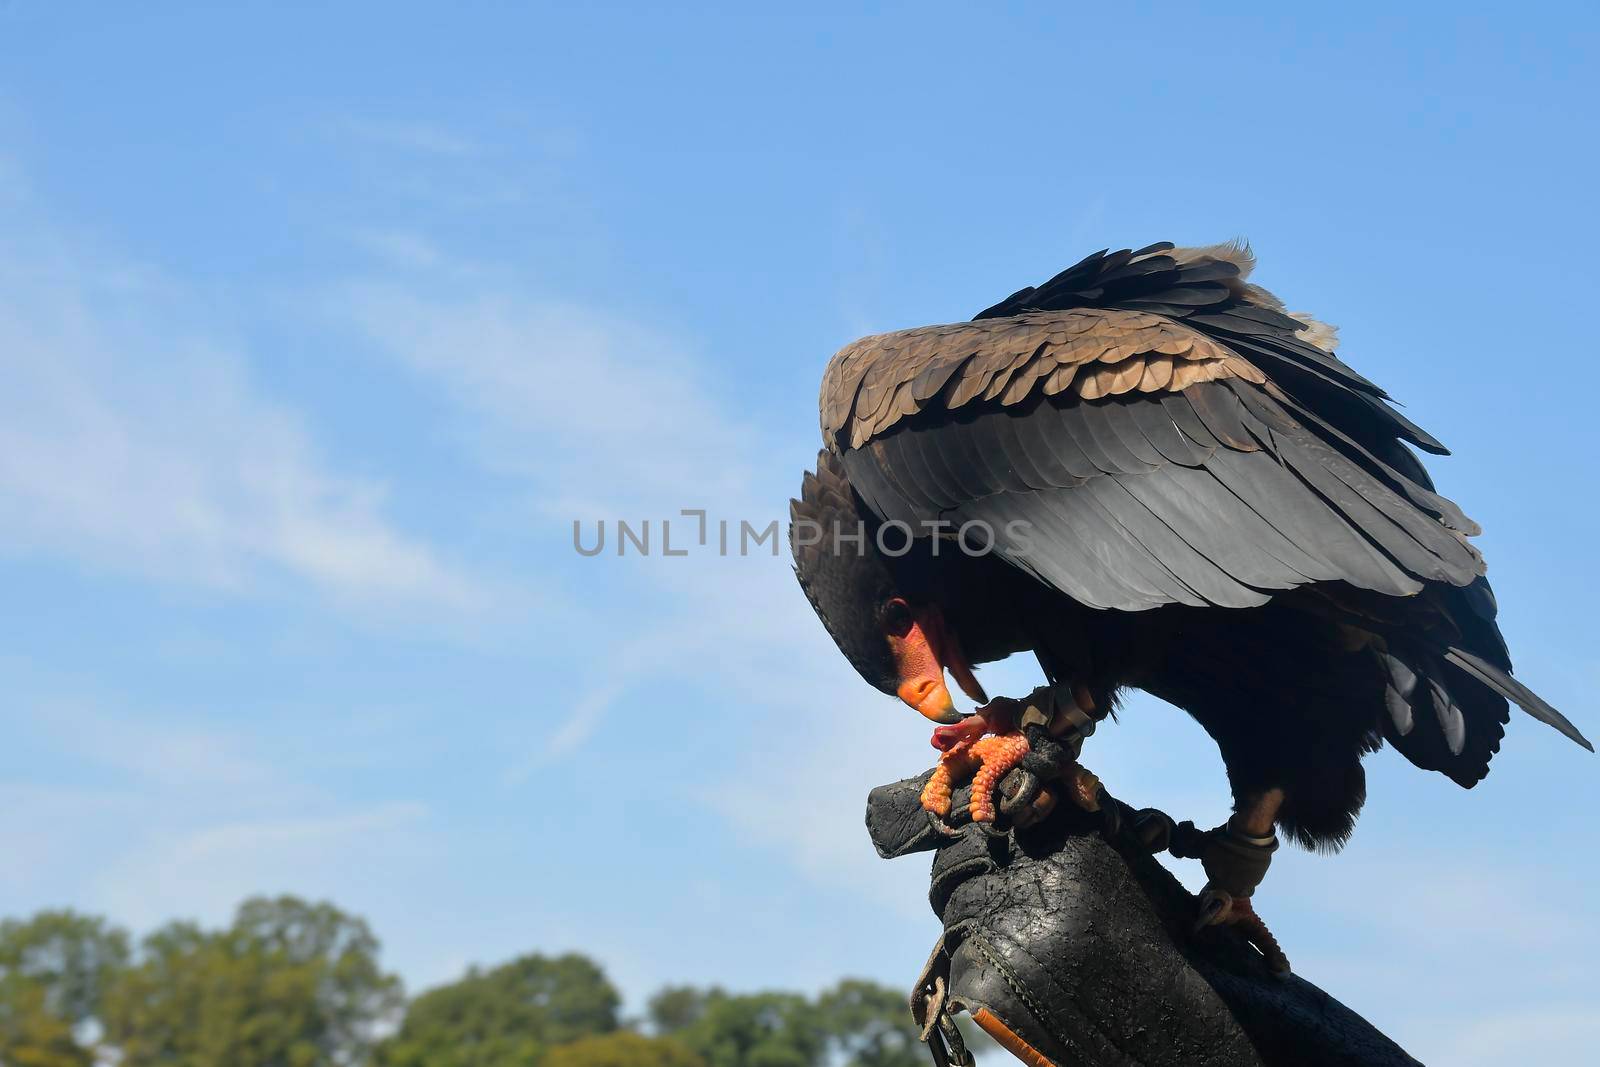 Bird of prey on hand of falconer. Falconer hand holds bird of prey against the background of blue sky.